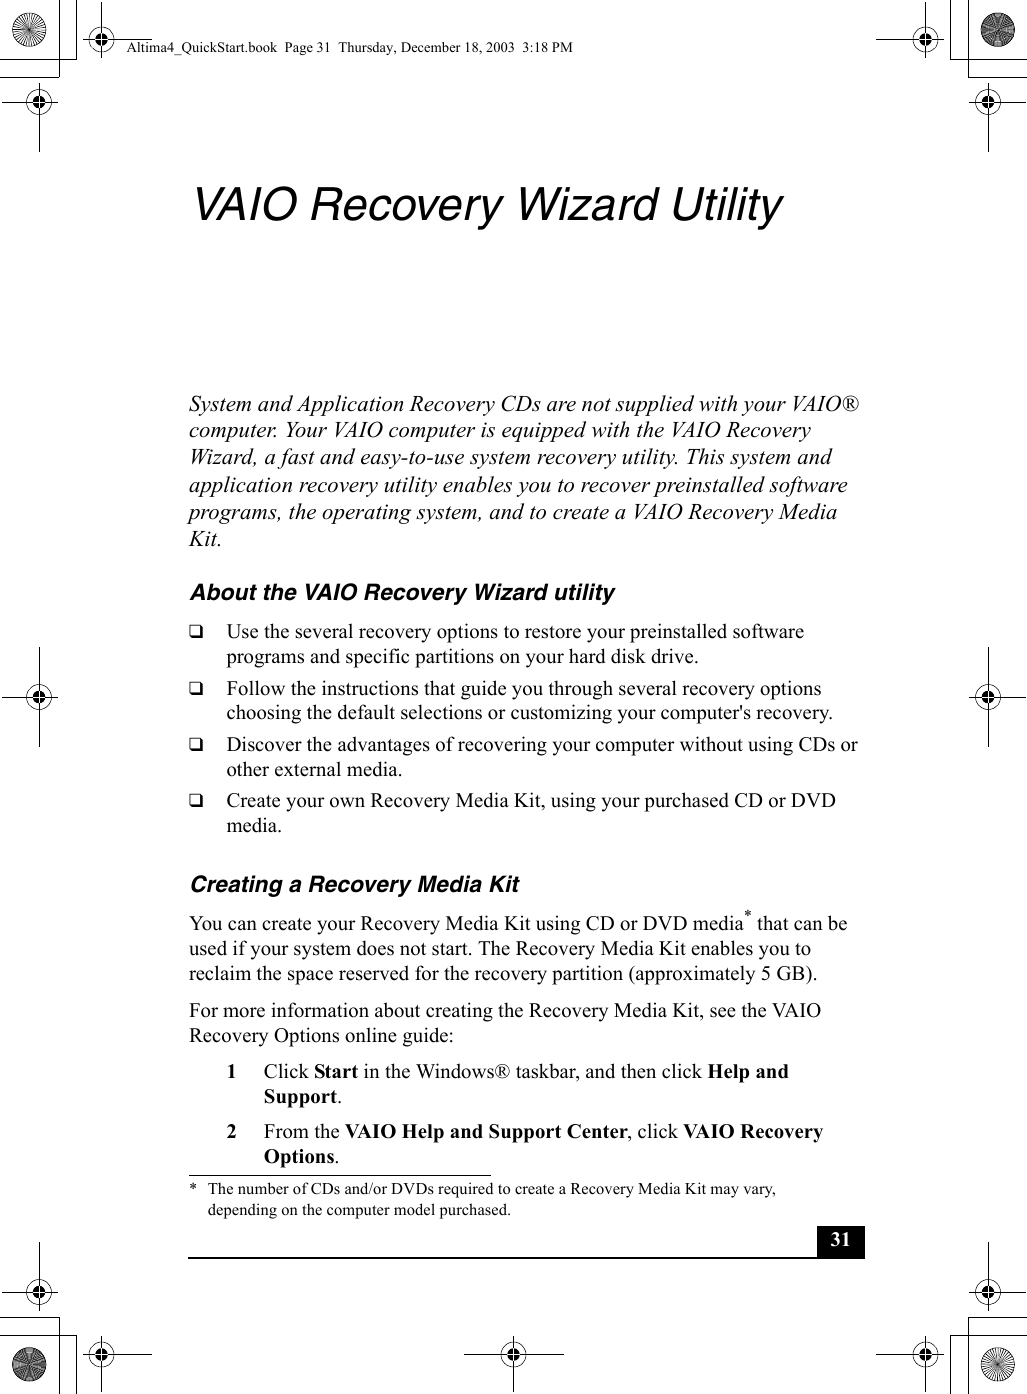 31VAIO Recovery Wizard UtilitySystem and Application Recovery CDs are not supplied with your VAIO® computer. Your VAIO computer is equipped with the VAIO Recovery Wizard, a fast and easy-to-use system recovery utility. This system and application recovery utility enables you to recover preinstalled software programs, the operating system, and to create a VAIO Recovery Media Kit.About the VAIO Recovery Wizard utility❑Use the several recovery options to restore your preinstalled software programs and specific partitions on your hard disk drive.❑Follow the instructions that guide you through several recovery options choosing the default selections or customizing your computer&apos;s recovery.❑Discover the advantages of recovering your computer without using CDs or other external media.❑Create your own Recovery Media Kit, using your purchased CD or DVD media.Creating a Recovery Media KitYou can create your Recovery Media Kit using CD or DVD media* that can be used if your system does not start. The Recovery Media Kit enables you to reclaim the space reserved for the recovery partition (approximately 5 GB).For more information about creating the Recovery Media Kit, see the VAIO Recovery Options online guide:1Click Start in the Windows® taskbar, and then click Help and Support.2From the VAIO Help and Support Center, click VAIO Recovery Options.* The number of CDs and/or DVDs required to create a Recovery Media Kit may vary, depending on the computer model purchased.Altima4_QuickStart.book  Page 31  Thursday, December 18, 2003  3:18 PM